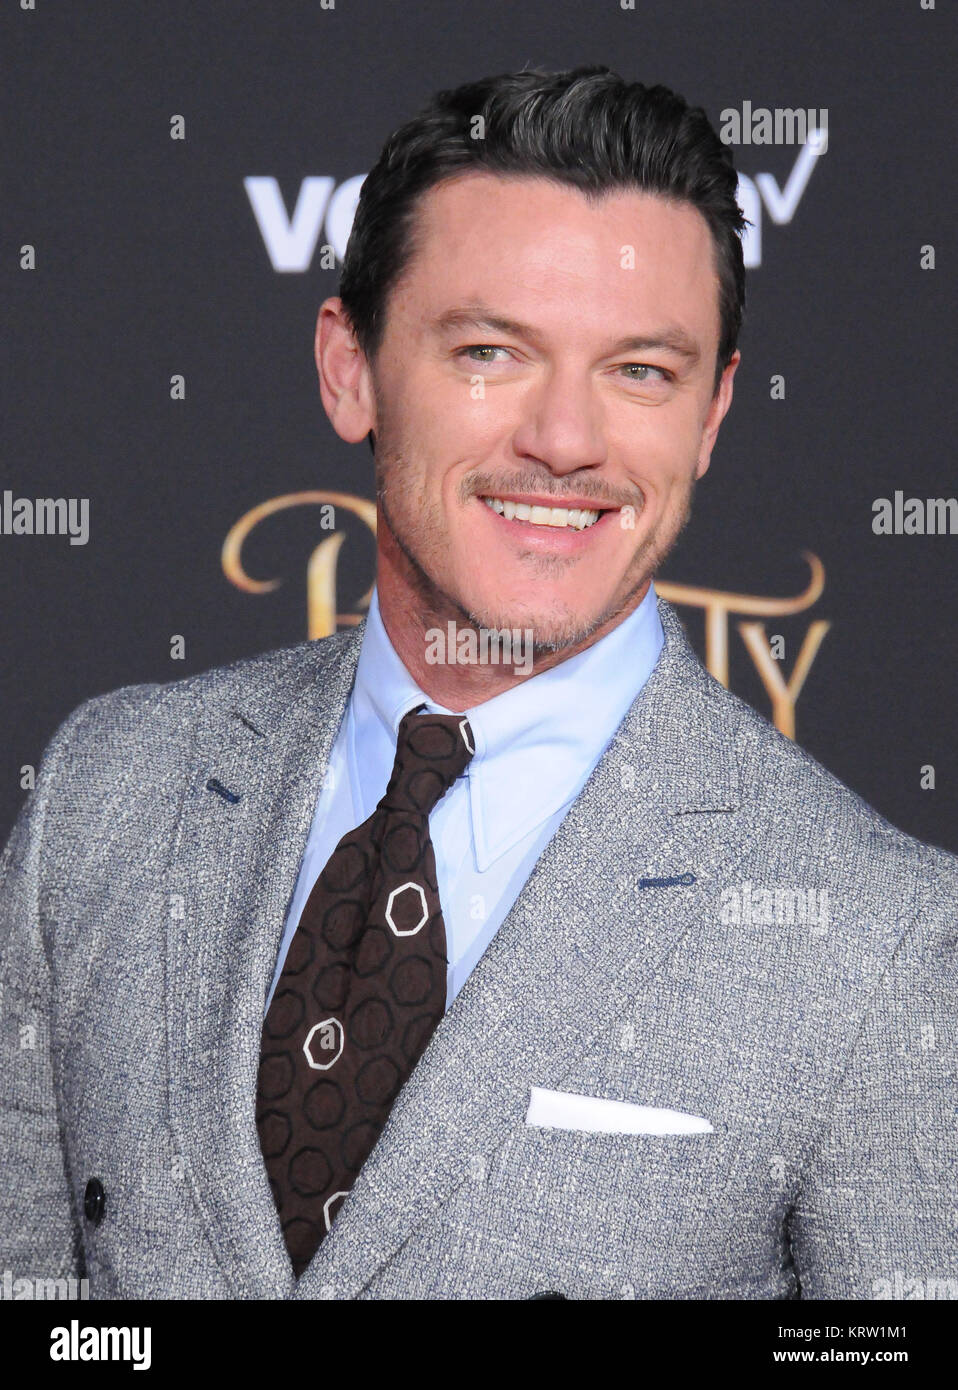 HOLLYWOOD, CA - MARCH 2:  Actor Luke Evans attends Disney's 'Beauty And The Beast' World Premiere at El Capitan Theatre on March 2, 2017 in Hollywood, California.  Photo by Barry King/Alamy Stock Photo Stock Photo